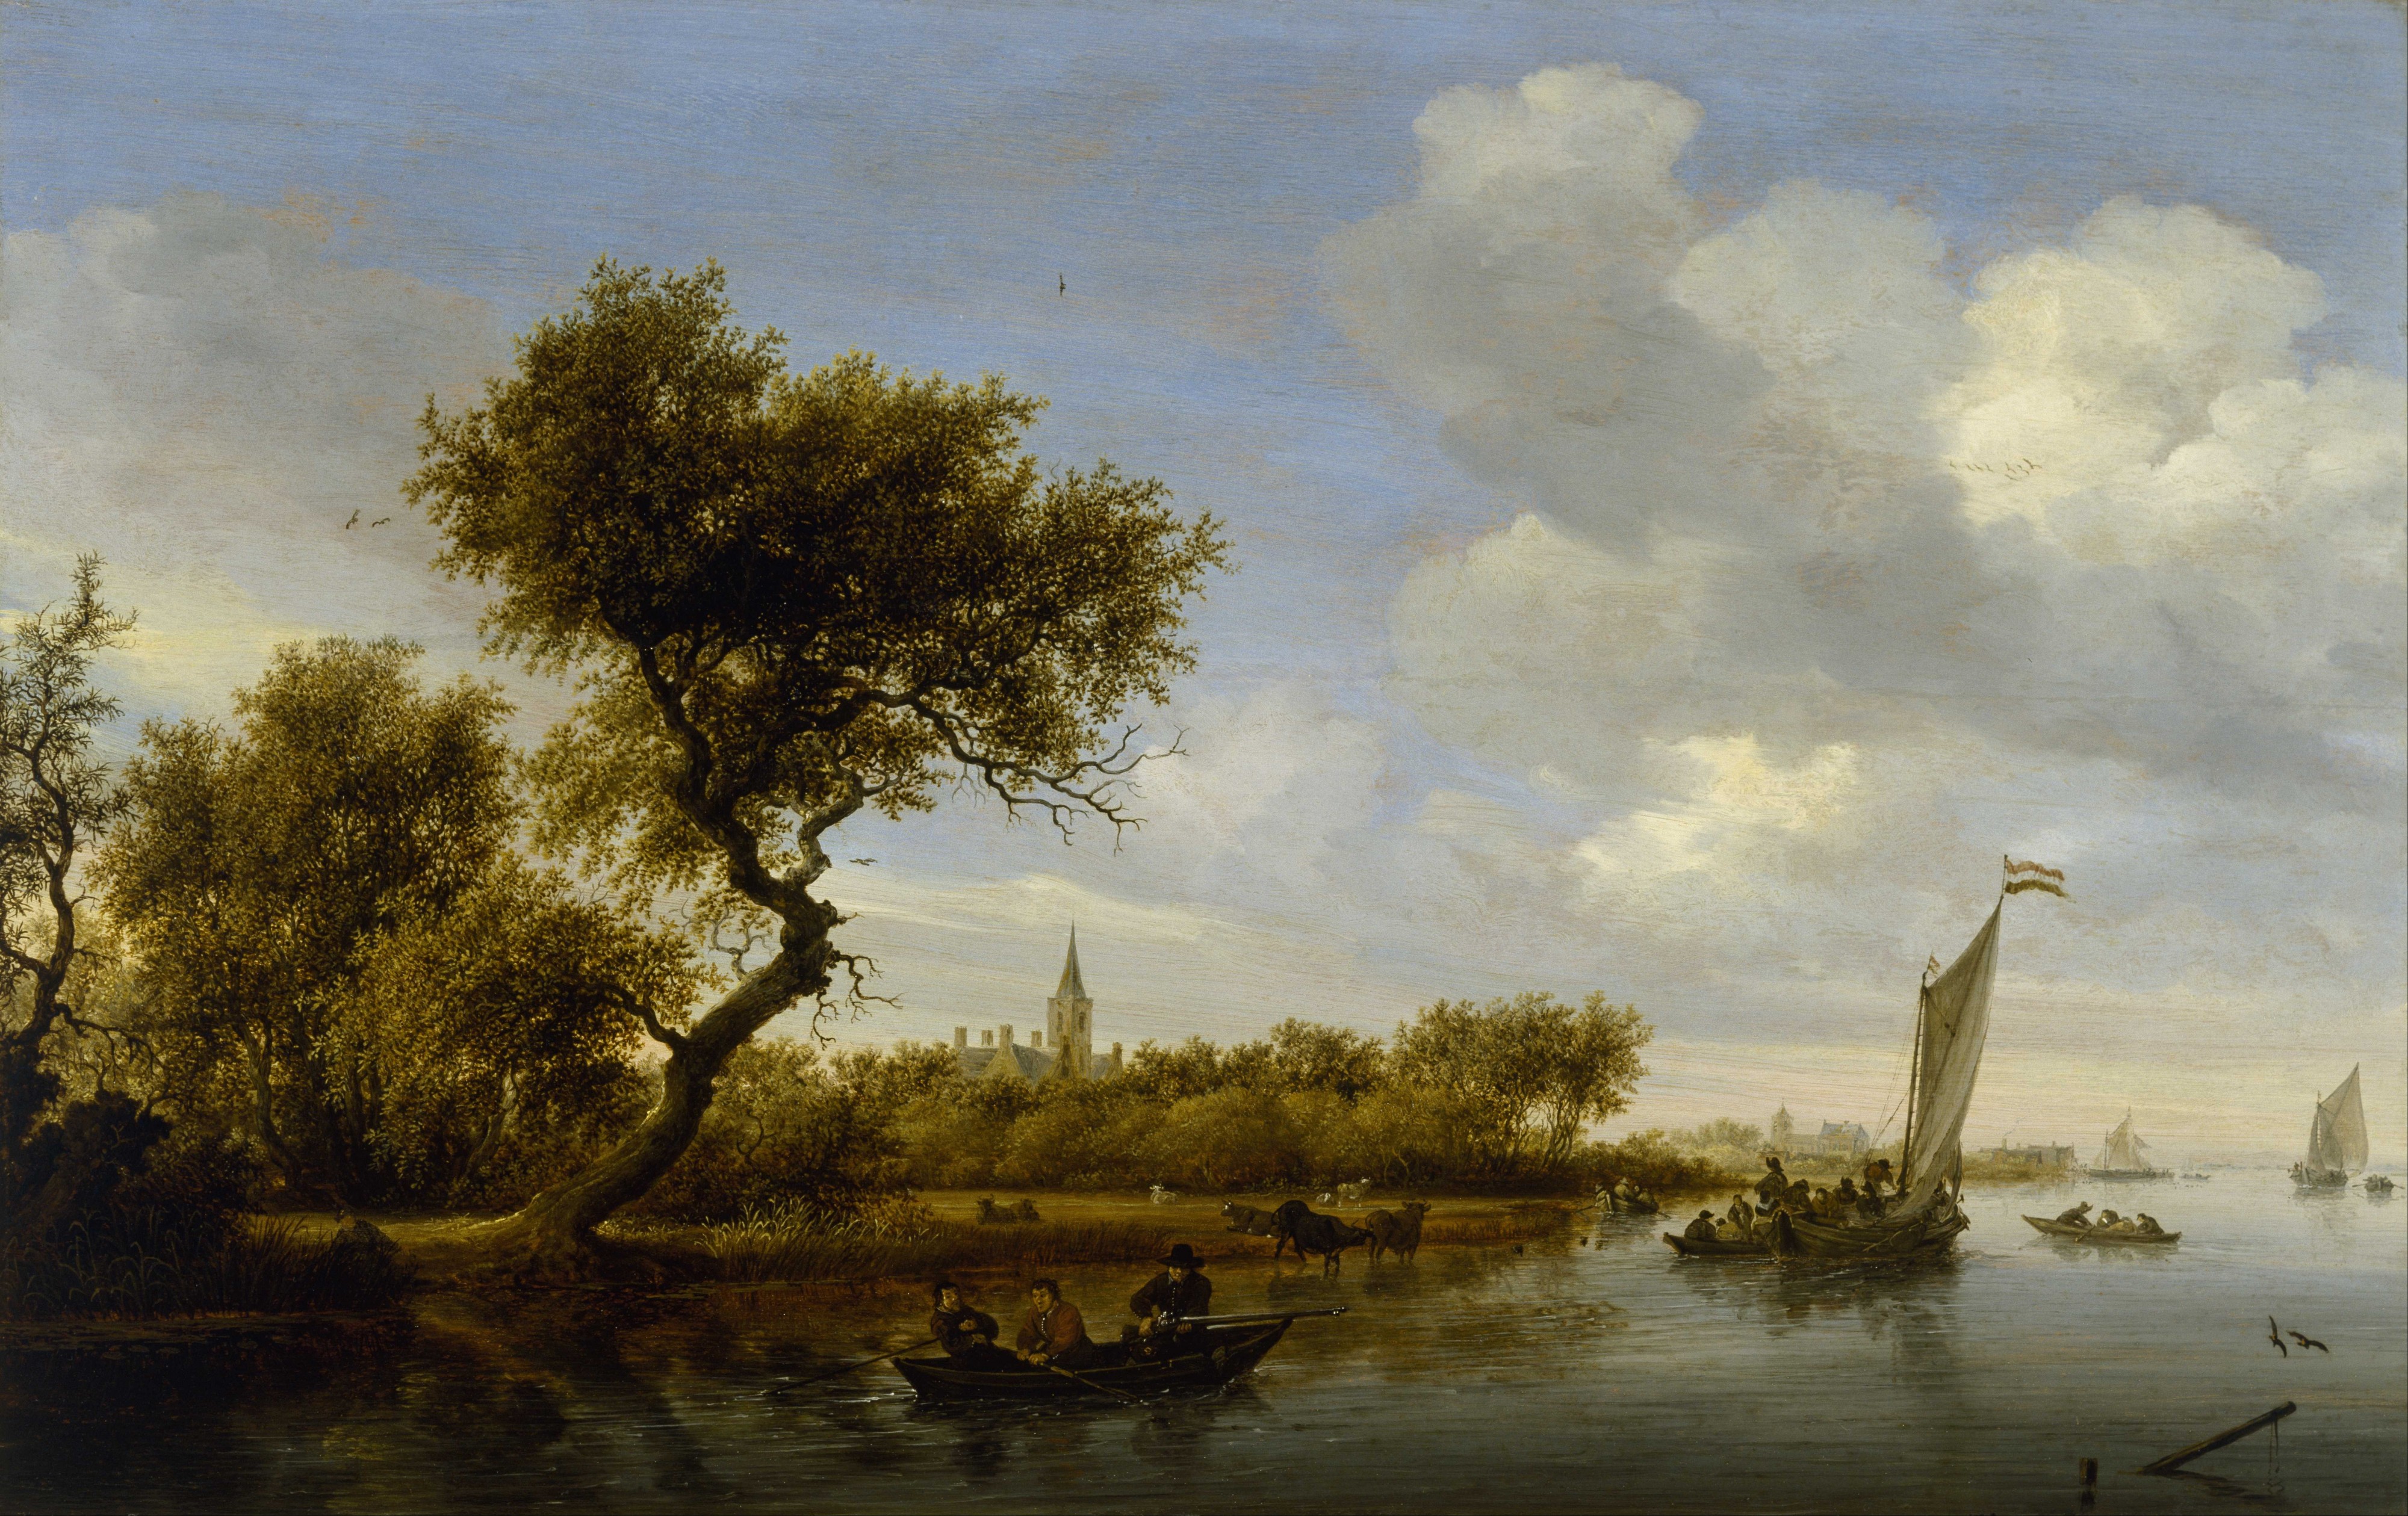 Salomon van Ruysdael - River Landscape with a Church in the Distance - Google Art Project